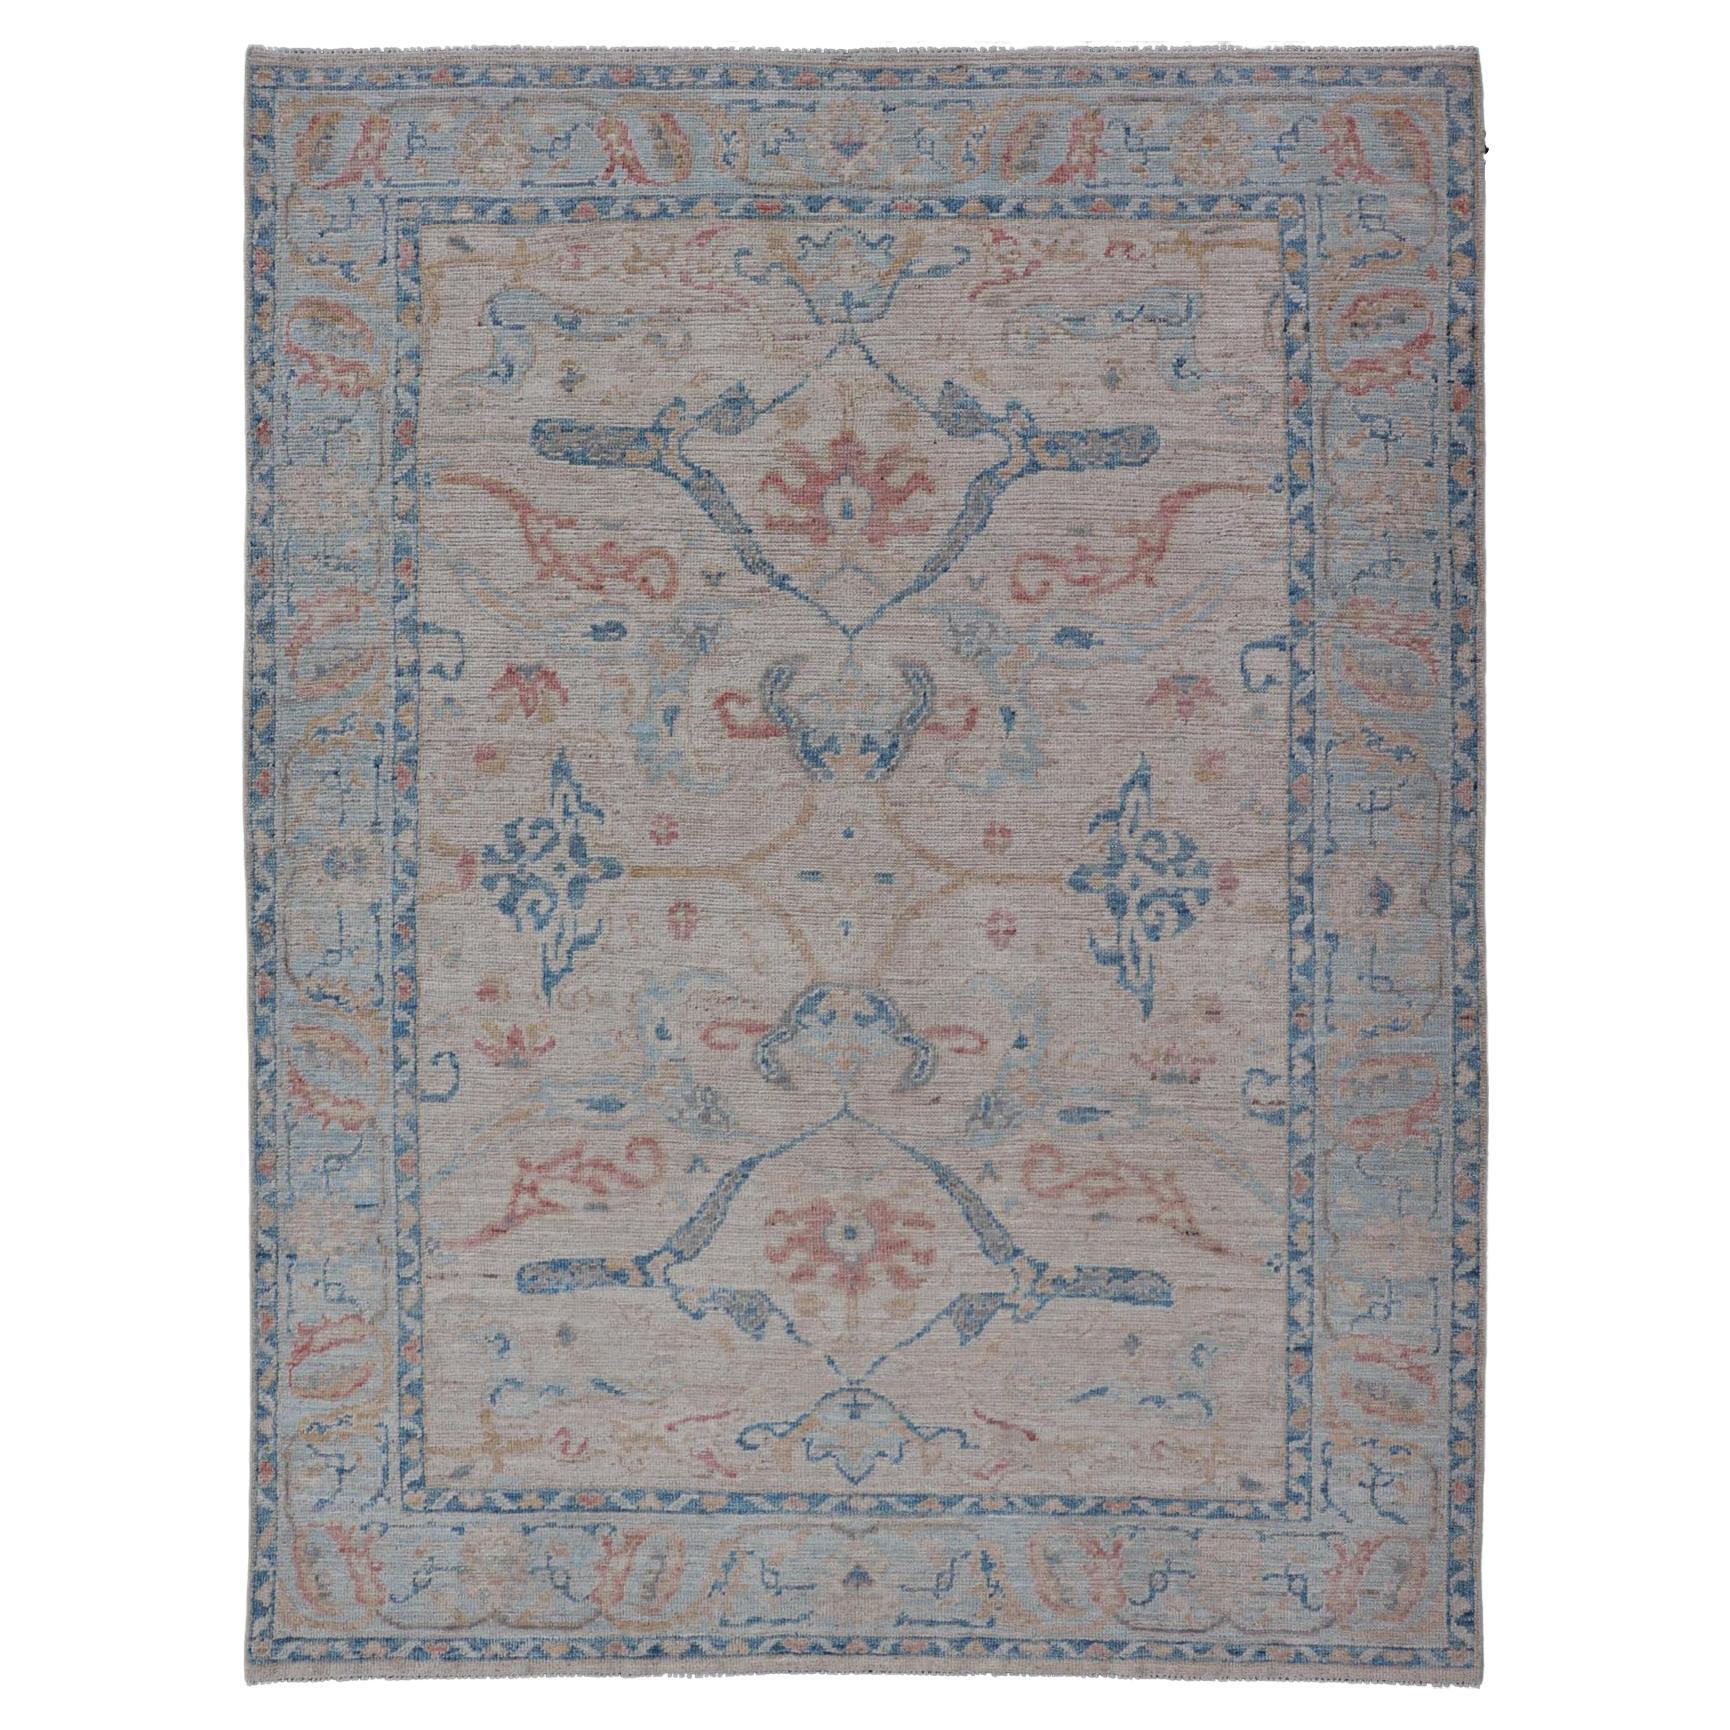 All-Over Hand Knotted Oushak Rug with Arabesque Design in Ivory and Blue Tones